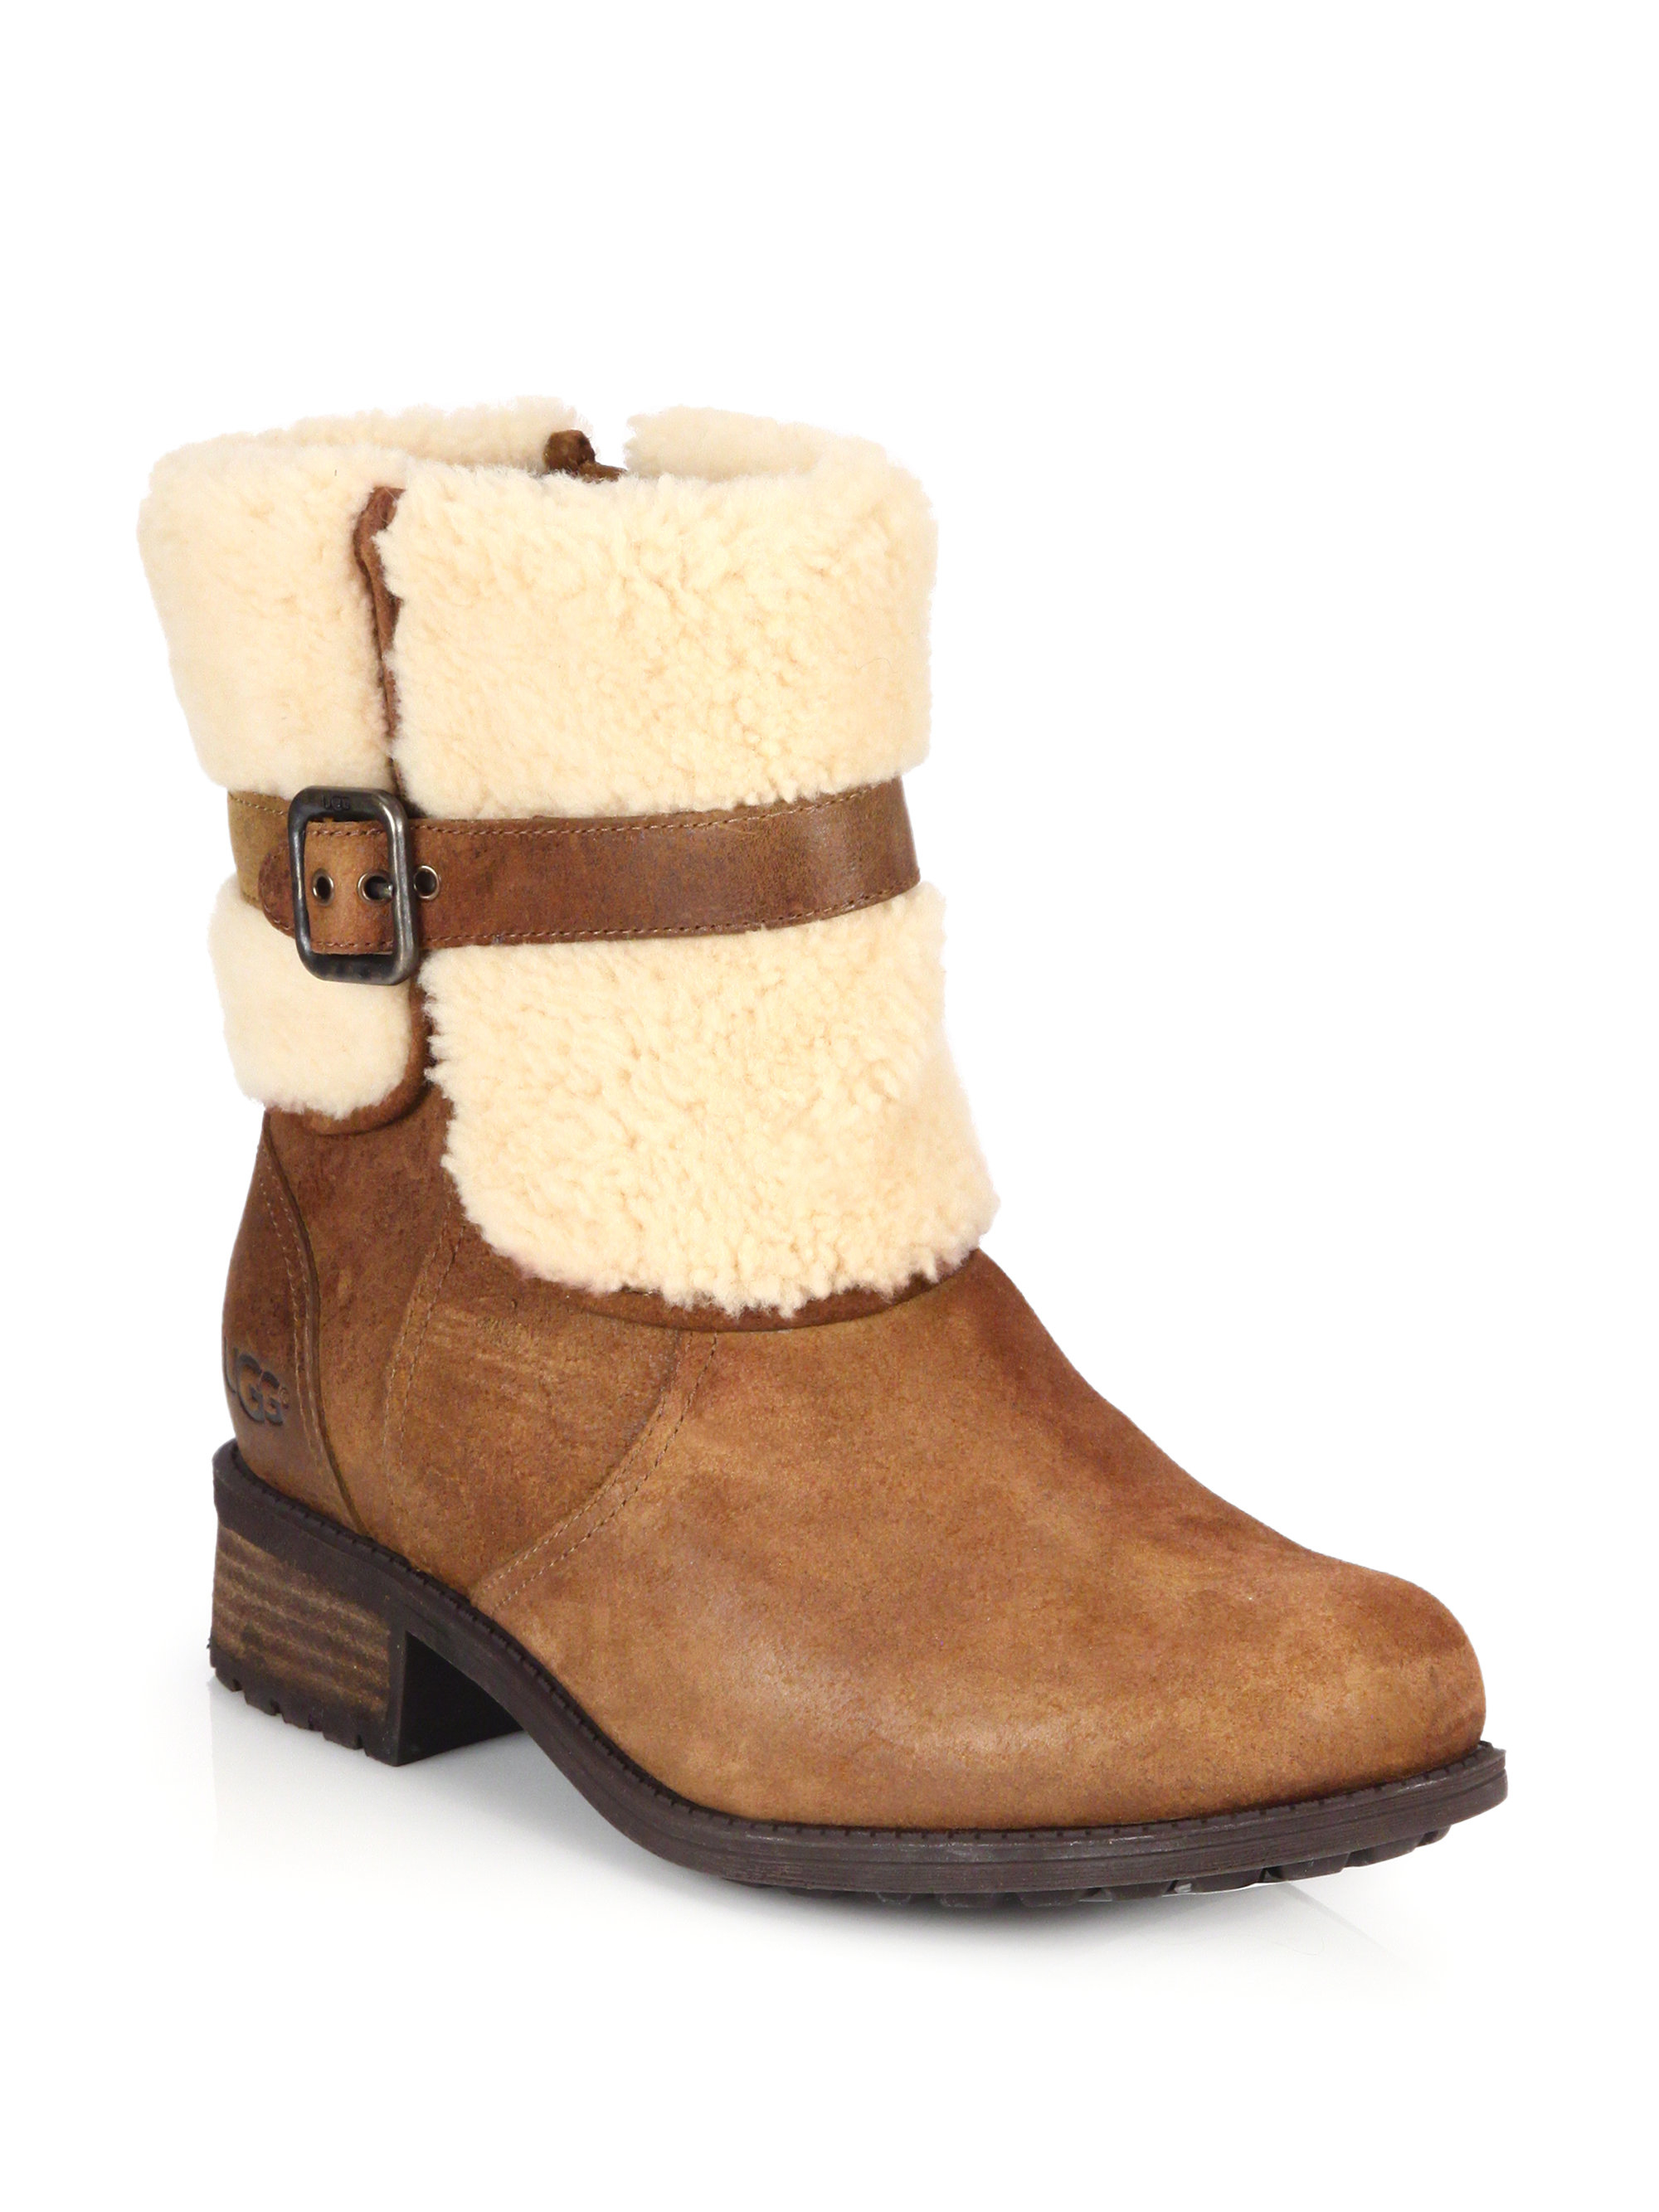 Ugg Blayre Ii Shearling Cuff Suede Boots in Brown | Lyst